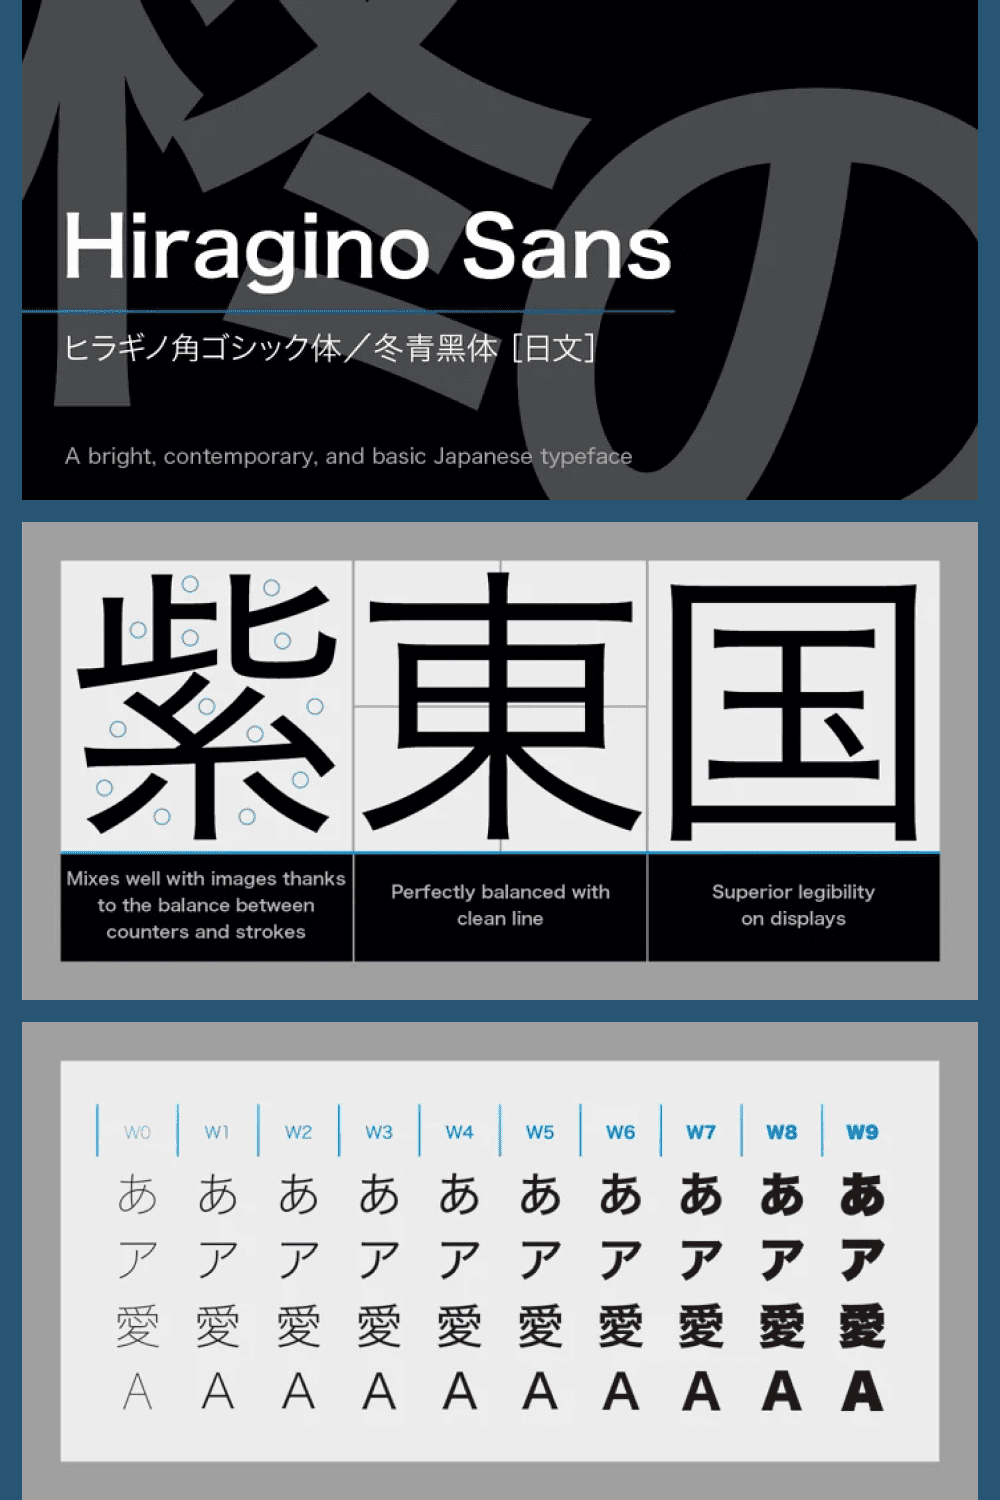 Mindful that Hiragino Sans (Kaku Gothic) would be used in conjunction with Hiragino Serif (Mincho), SCREEN developed a font that anticipated today’s world where most people do their reading on displays and yet still has an orthodox letterform that does not blur when printed on paper.